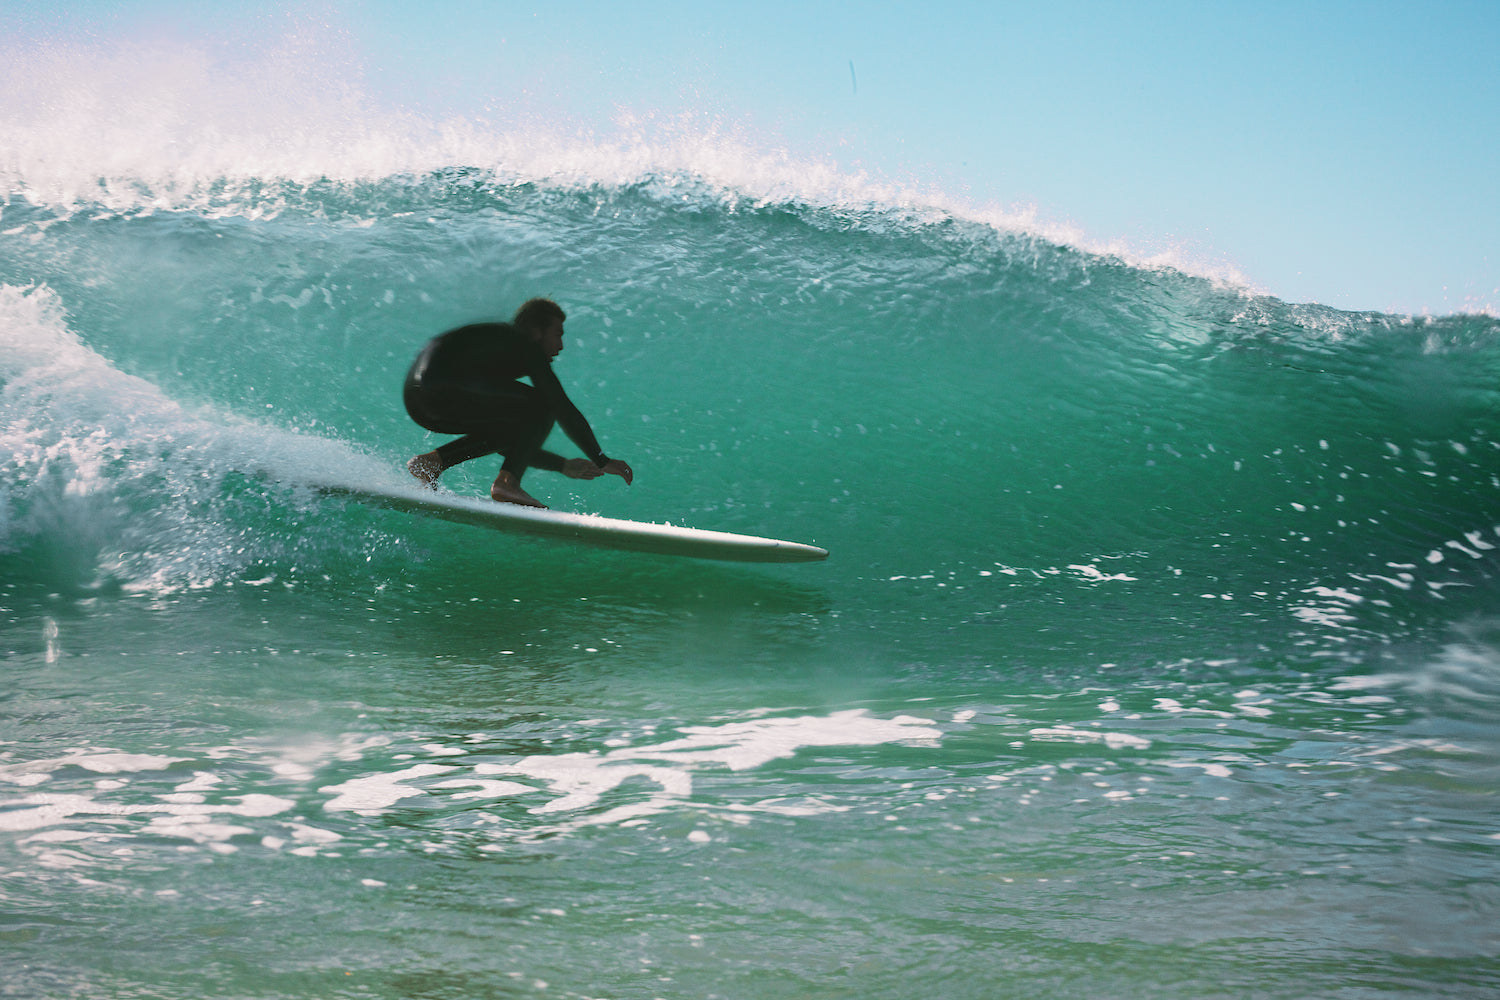 How to Get Barreled (On Any Surfboard)